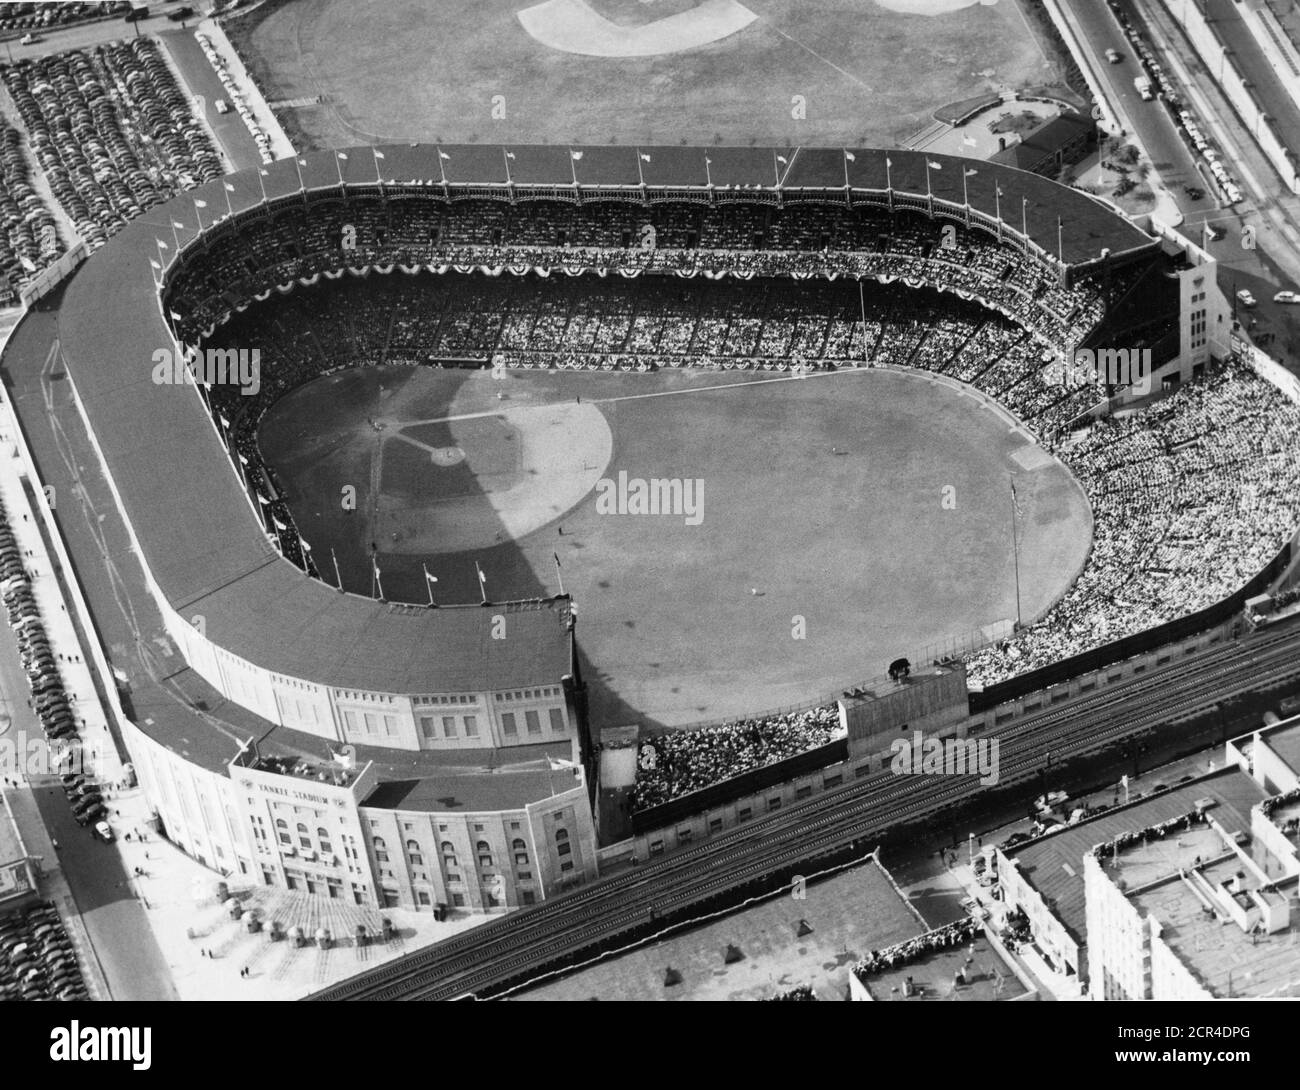 https://c8.alamy.com/comp/2CR4DPG/aerial-view-of-yankee-stadium-with-a-capacity-filled-audience-during-a-baseball-game-new-york-ny-1954-photo-by-rbm-vintage-images-2CR4DPG.jpg